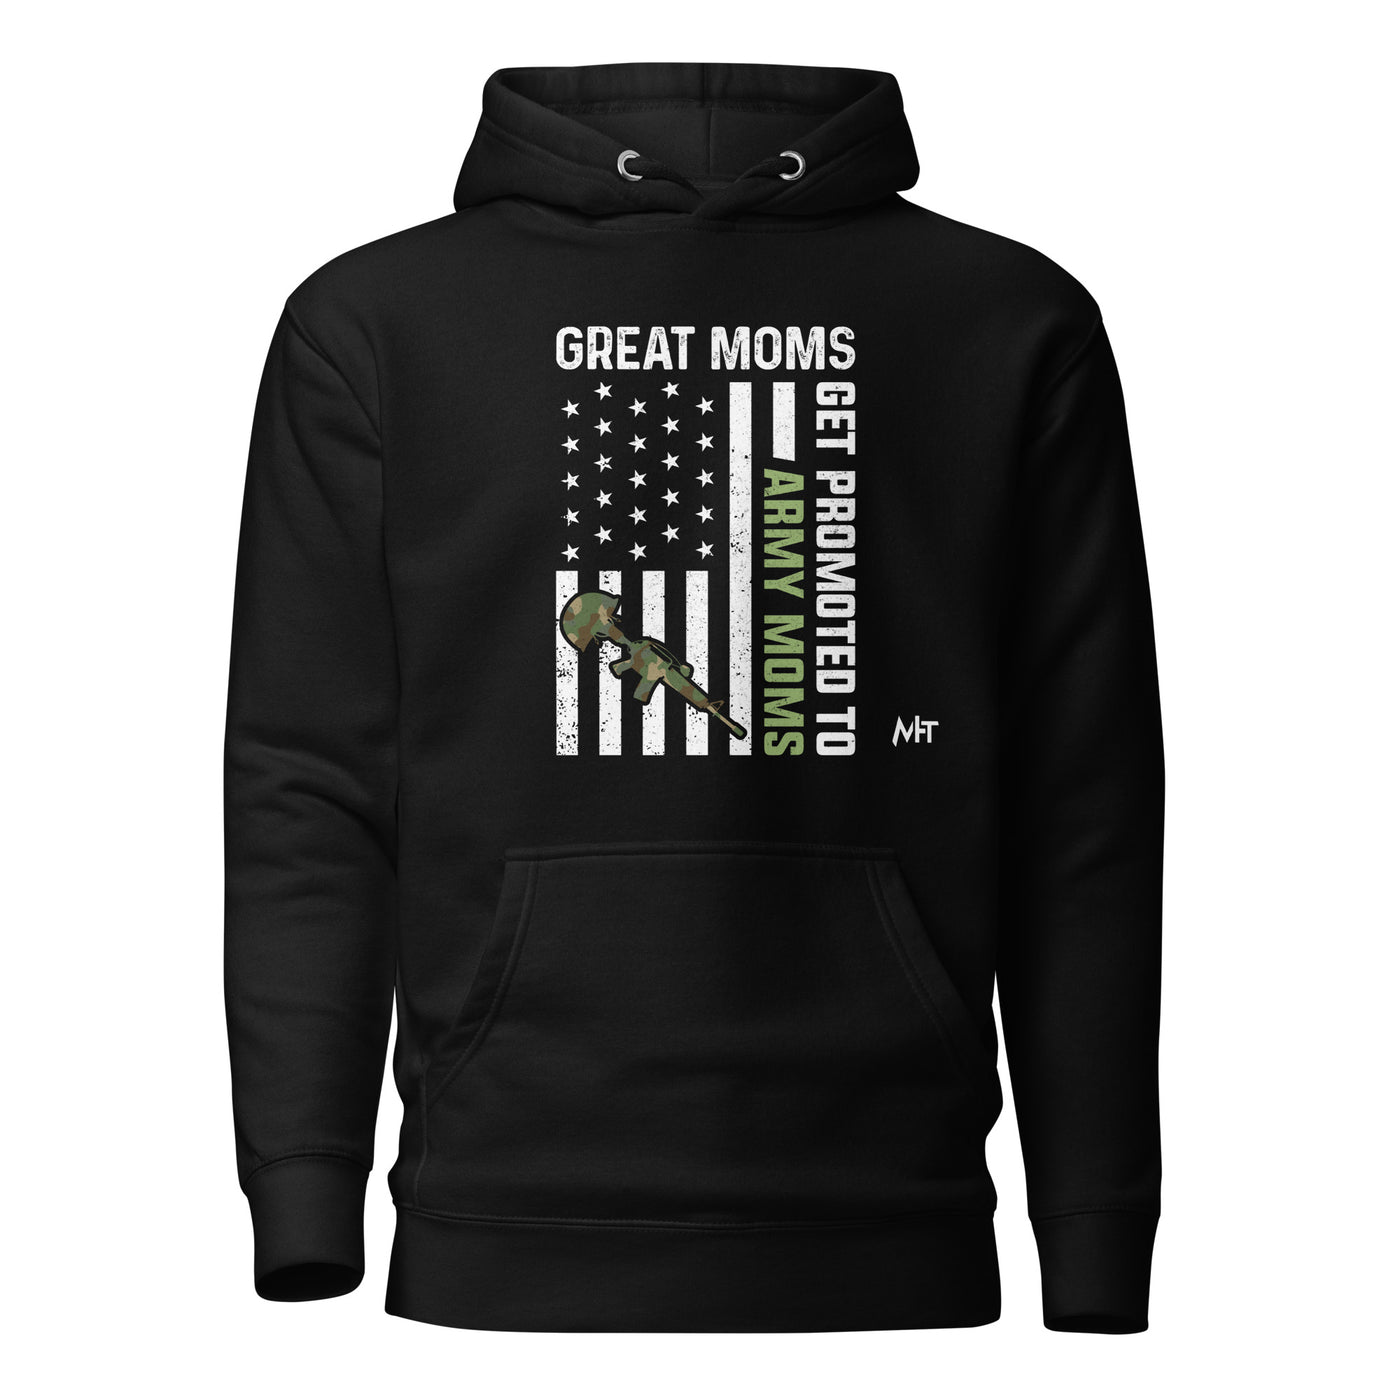 Army Moms, Great Moms promoted - Unisex Hoodie